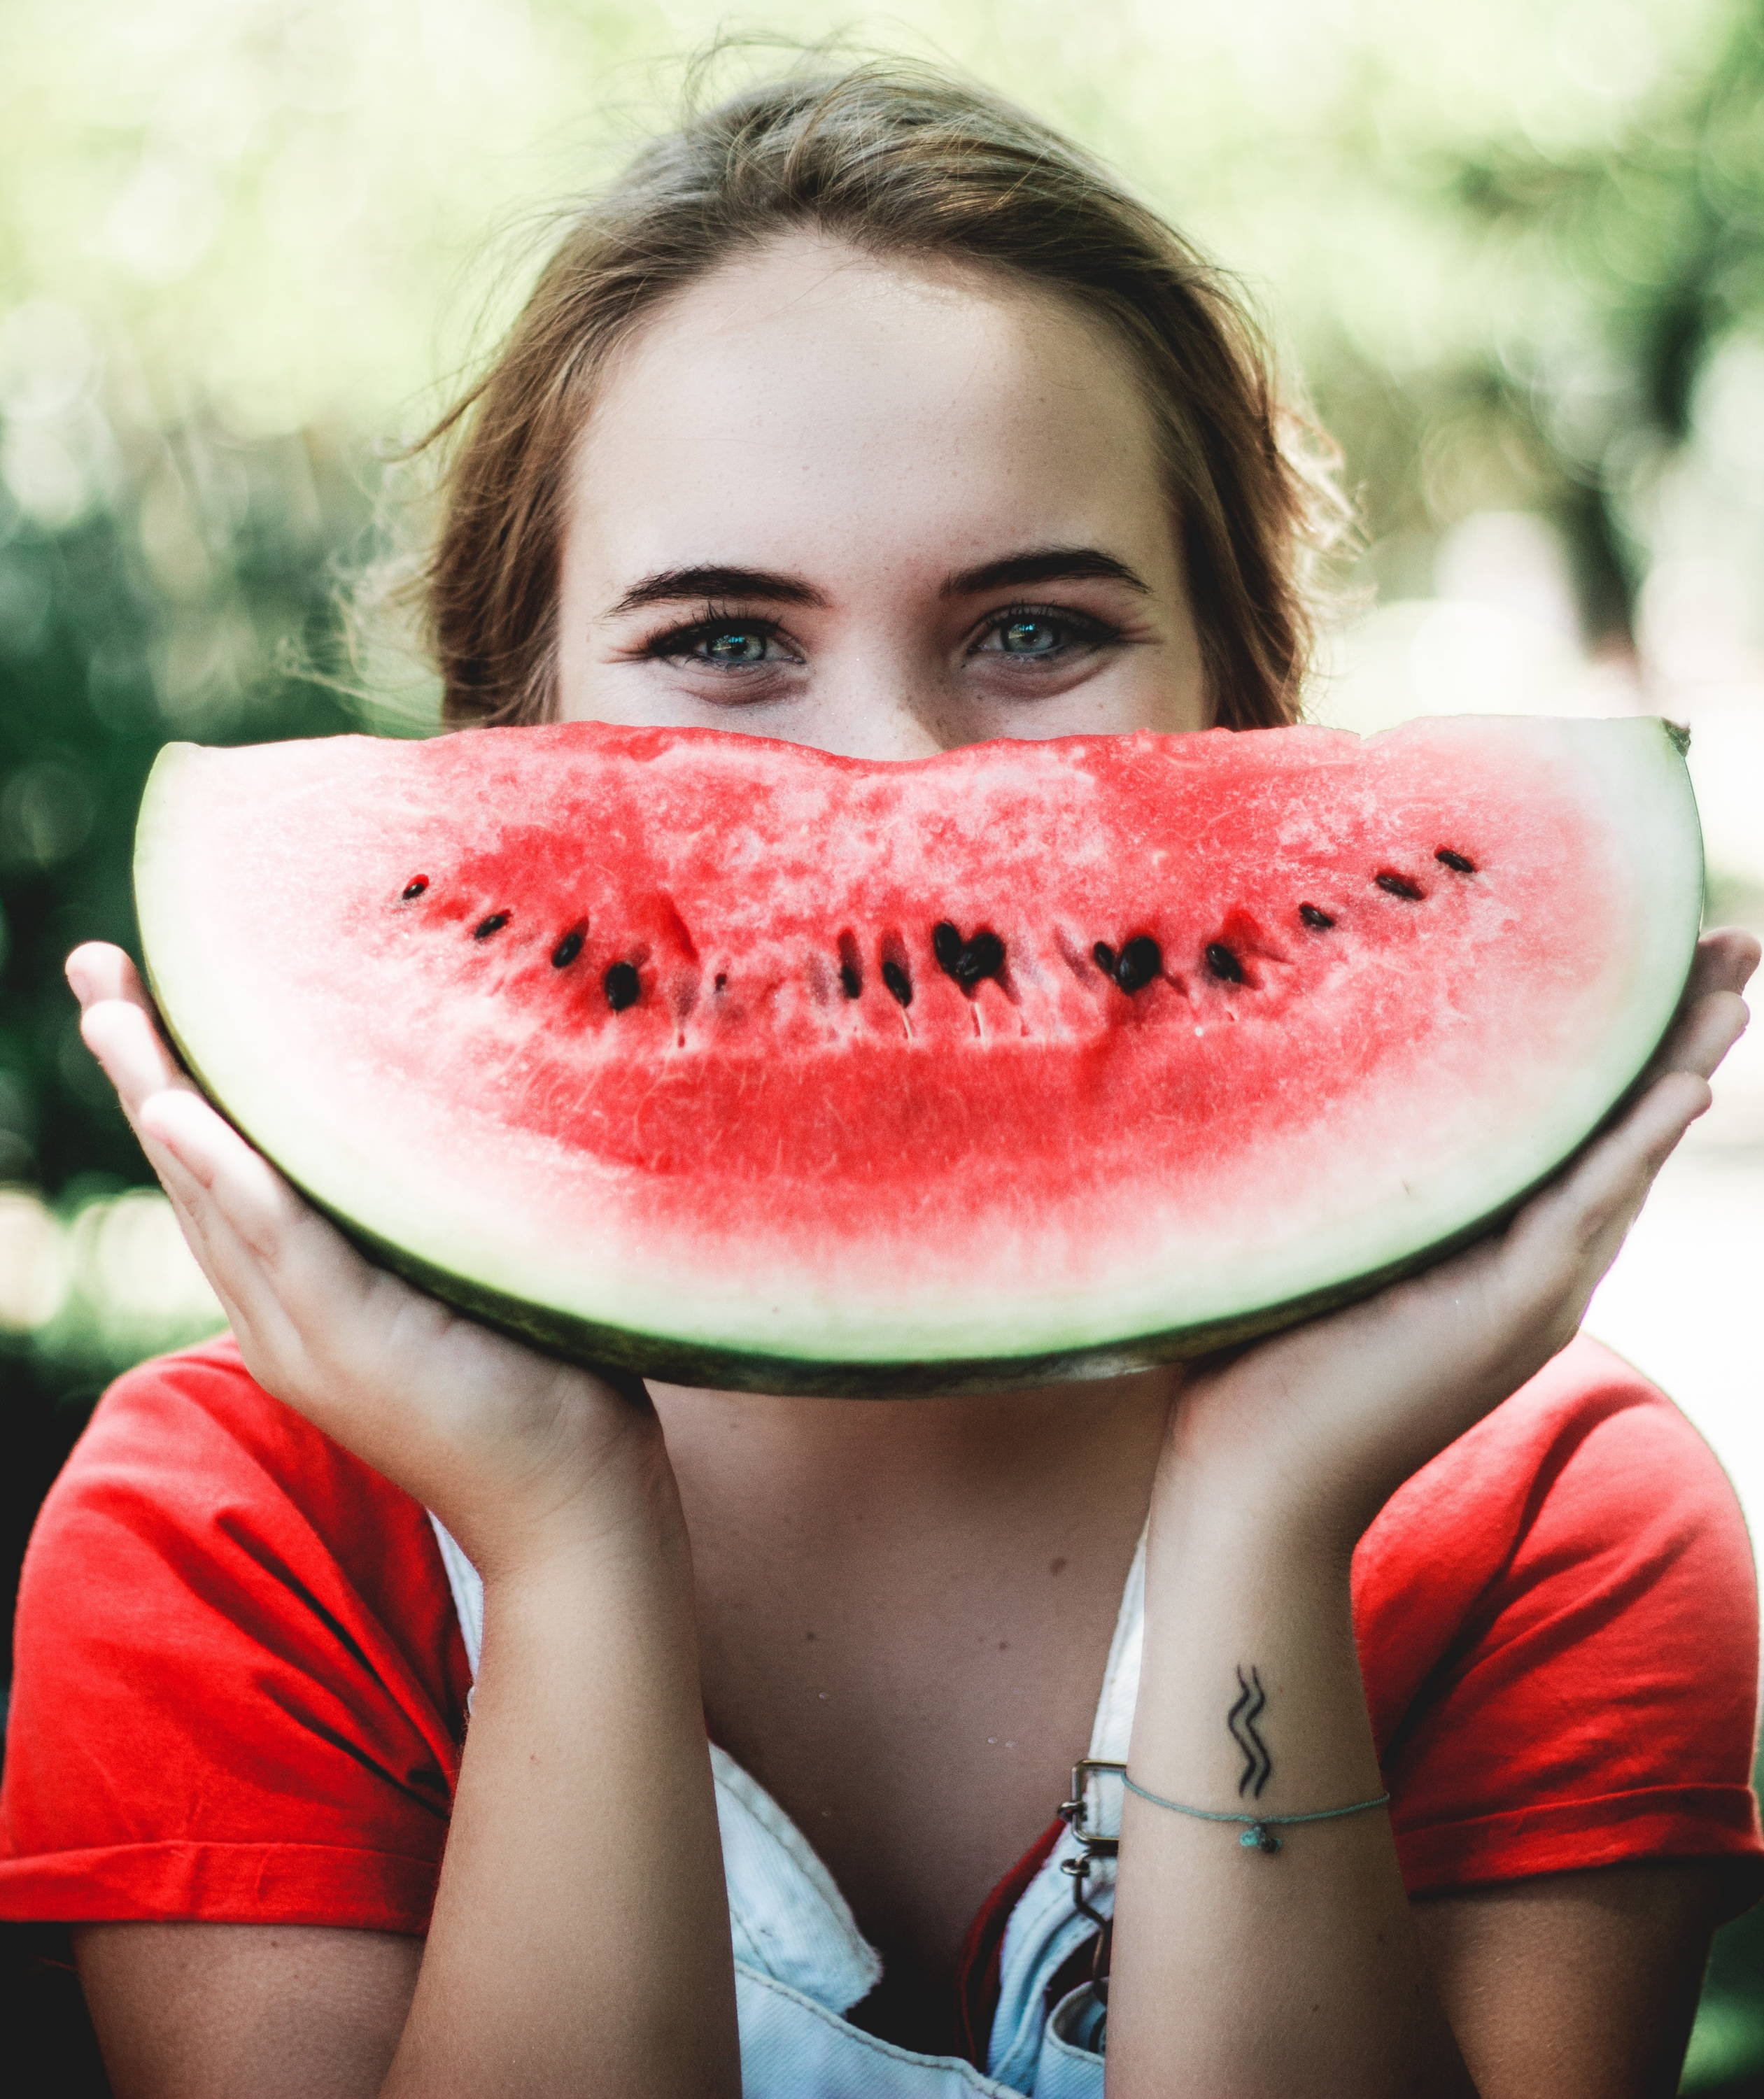 A smiling woman holding a giant slice of watermelon